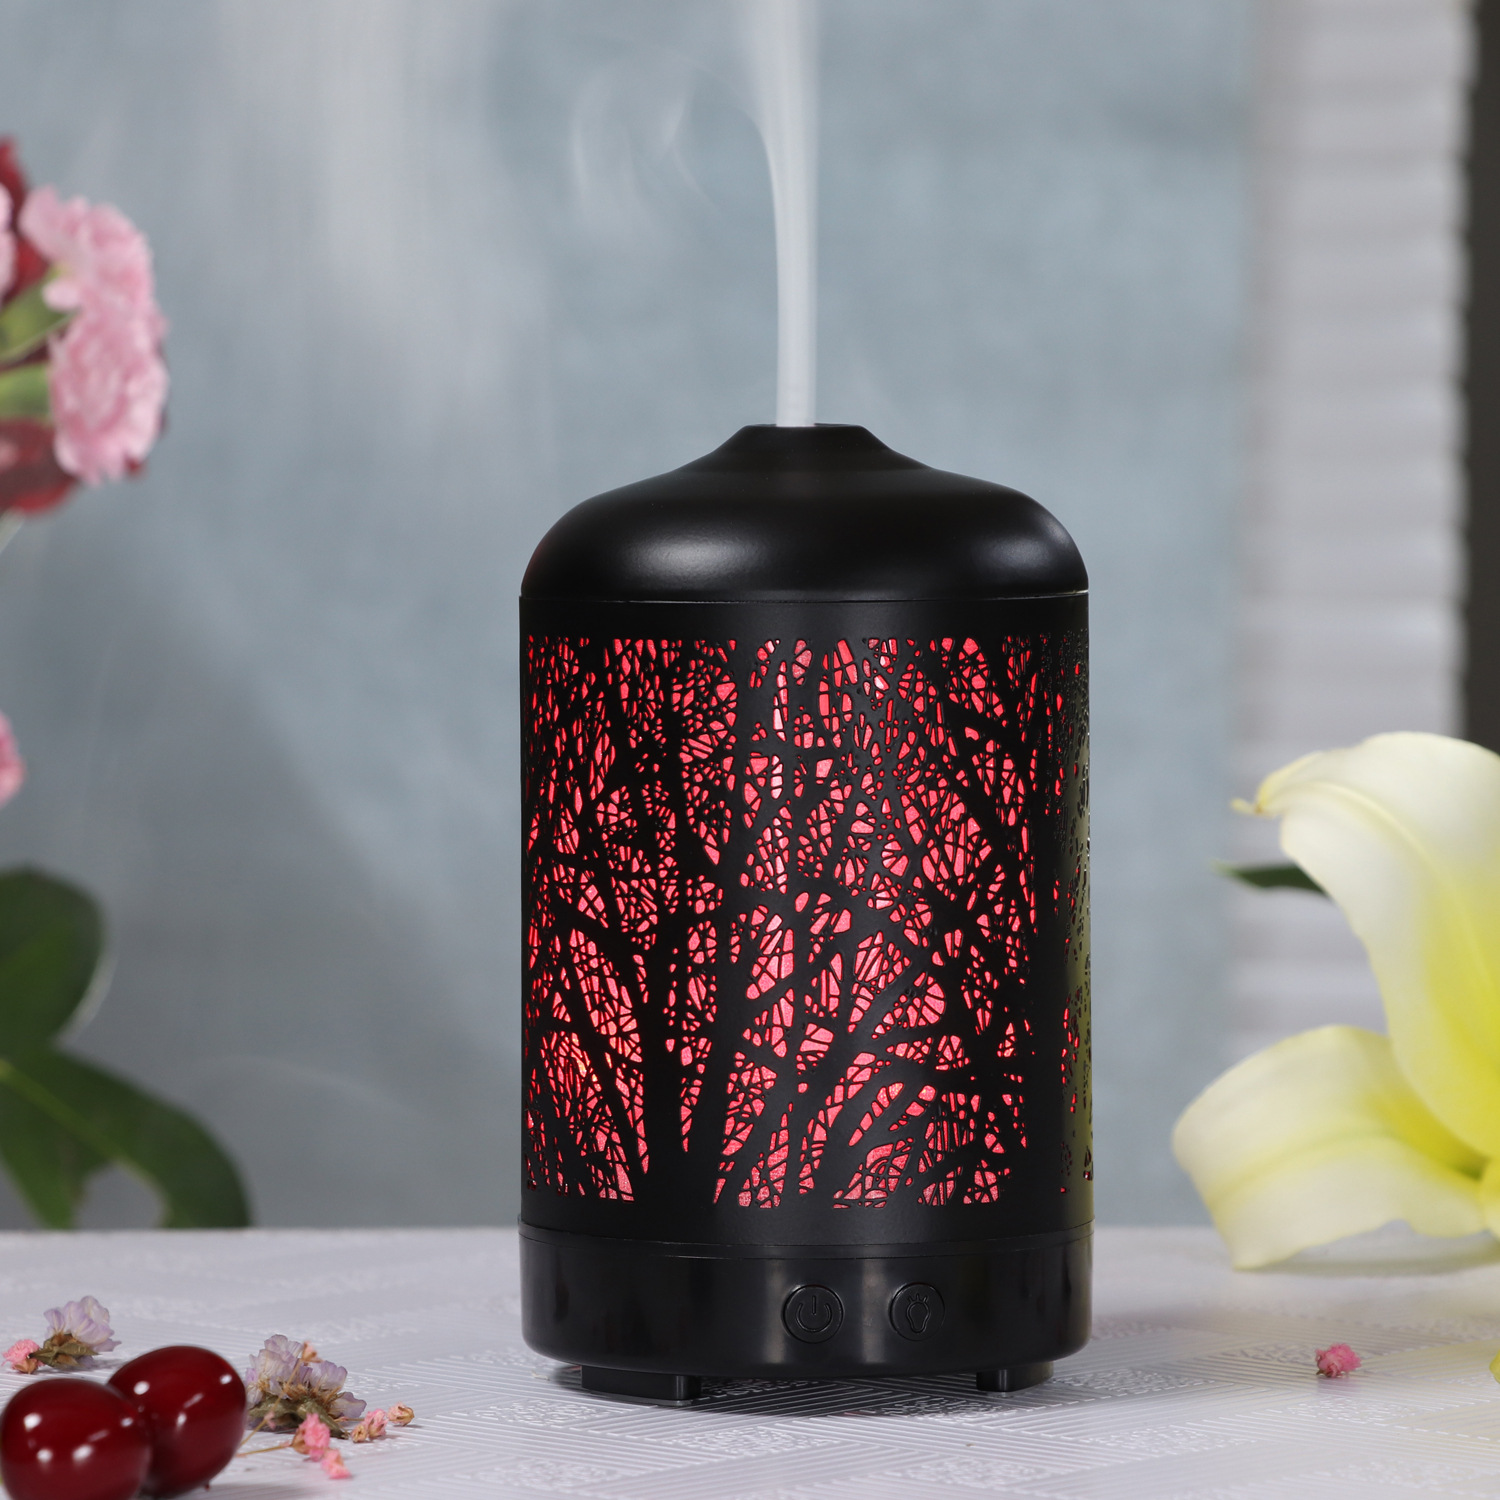 Iron Art Openwork Pattern Air Humidifier Aromatherapy Diffuser Aroma Essential Oil Nebulizer 100ml 